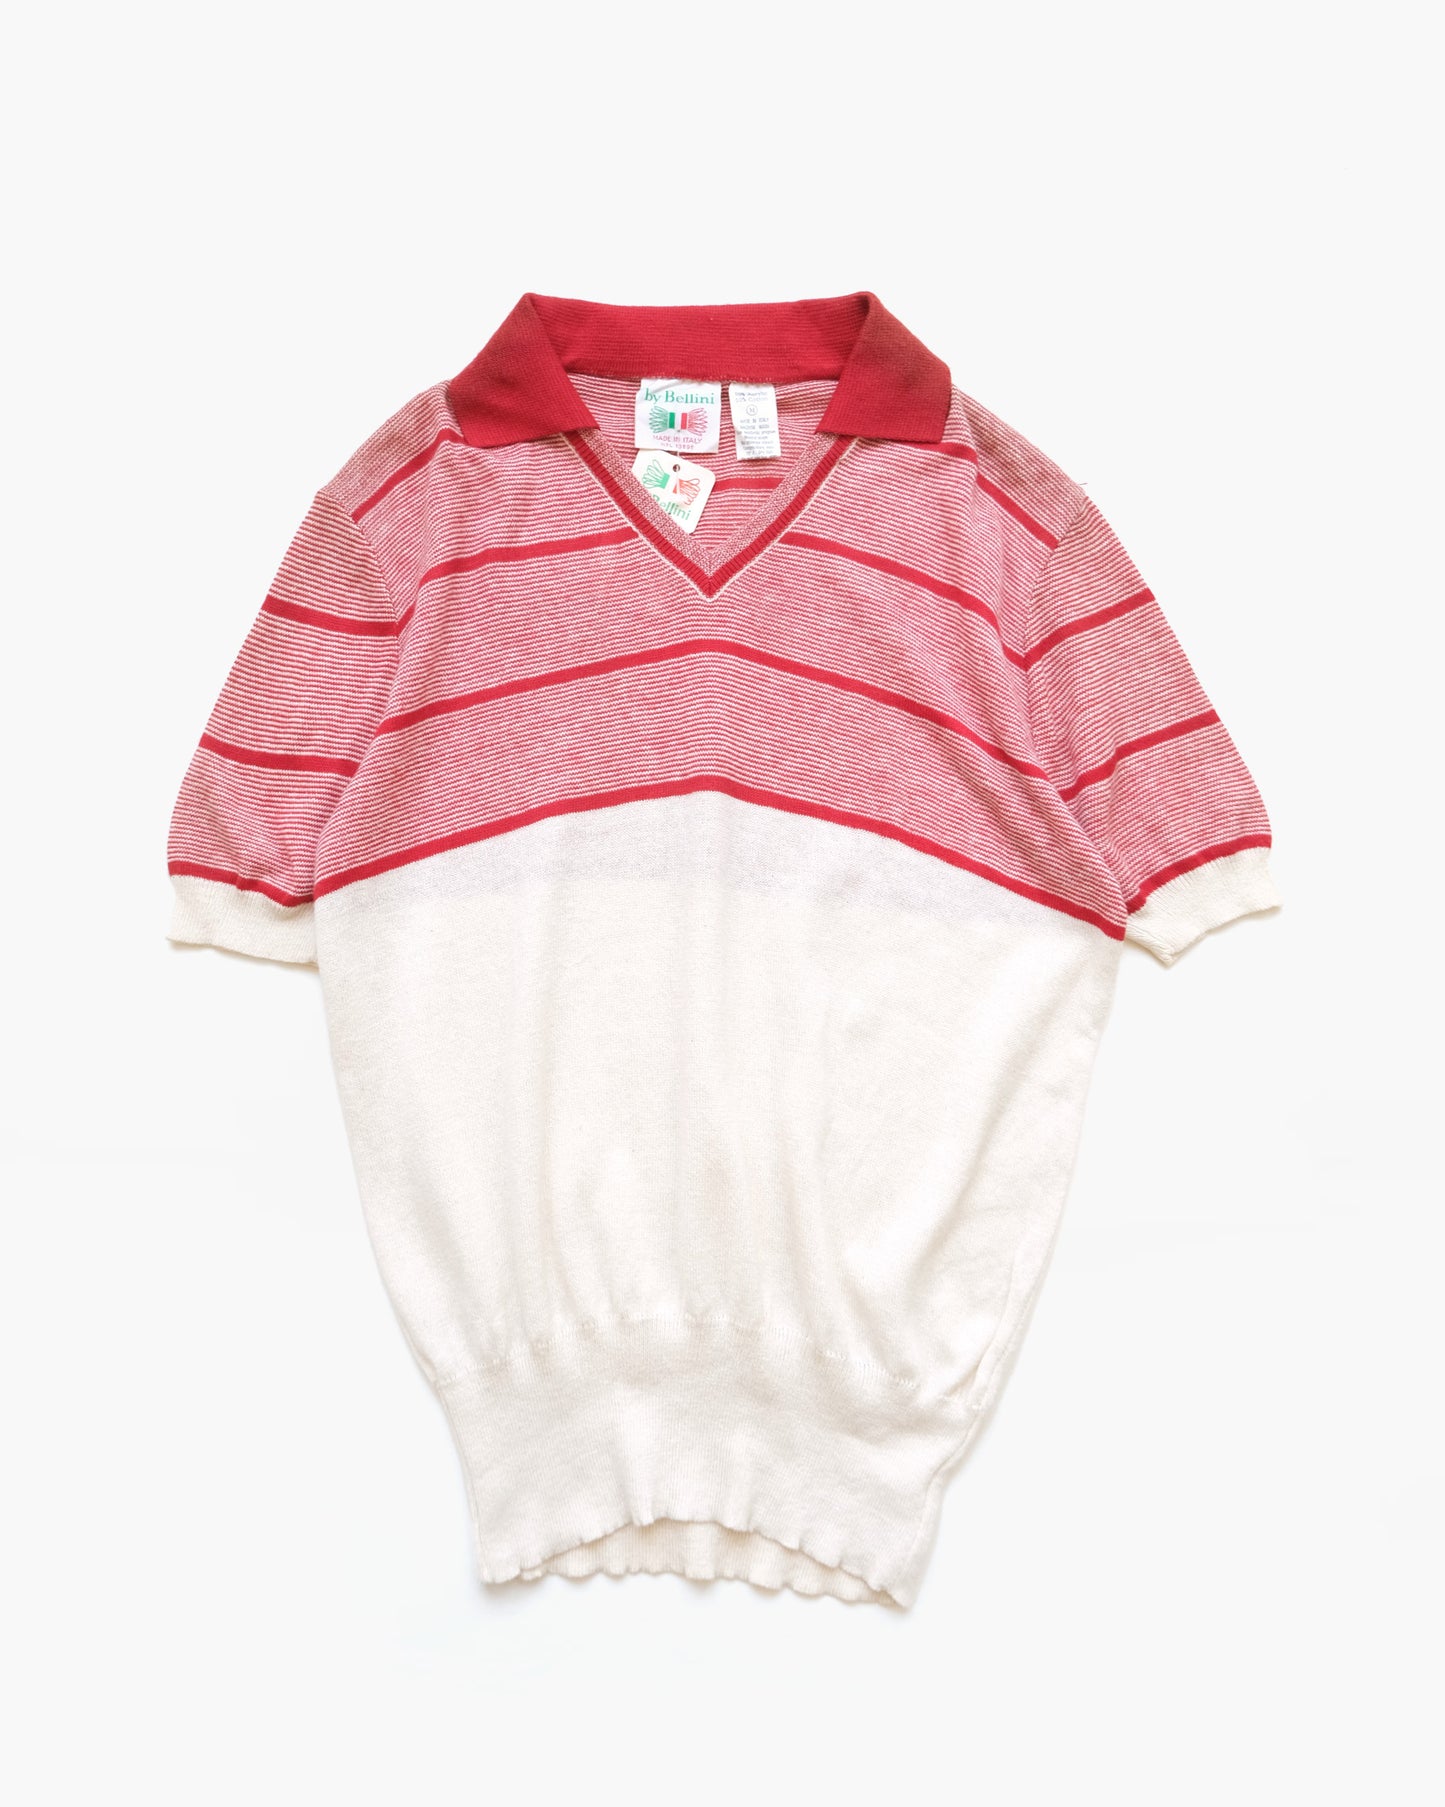 Design Acrylic Knit Polo Made in Italy